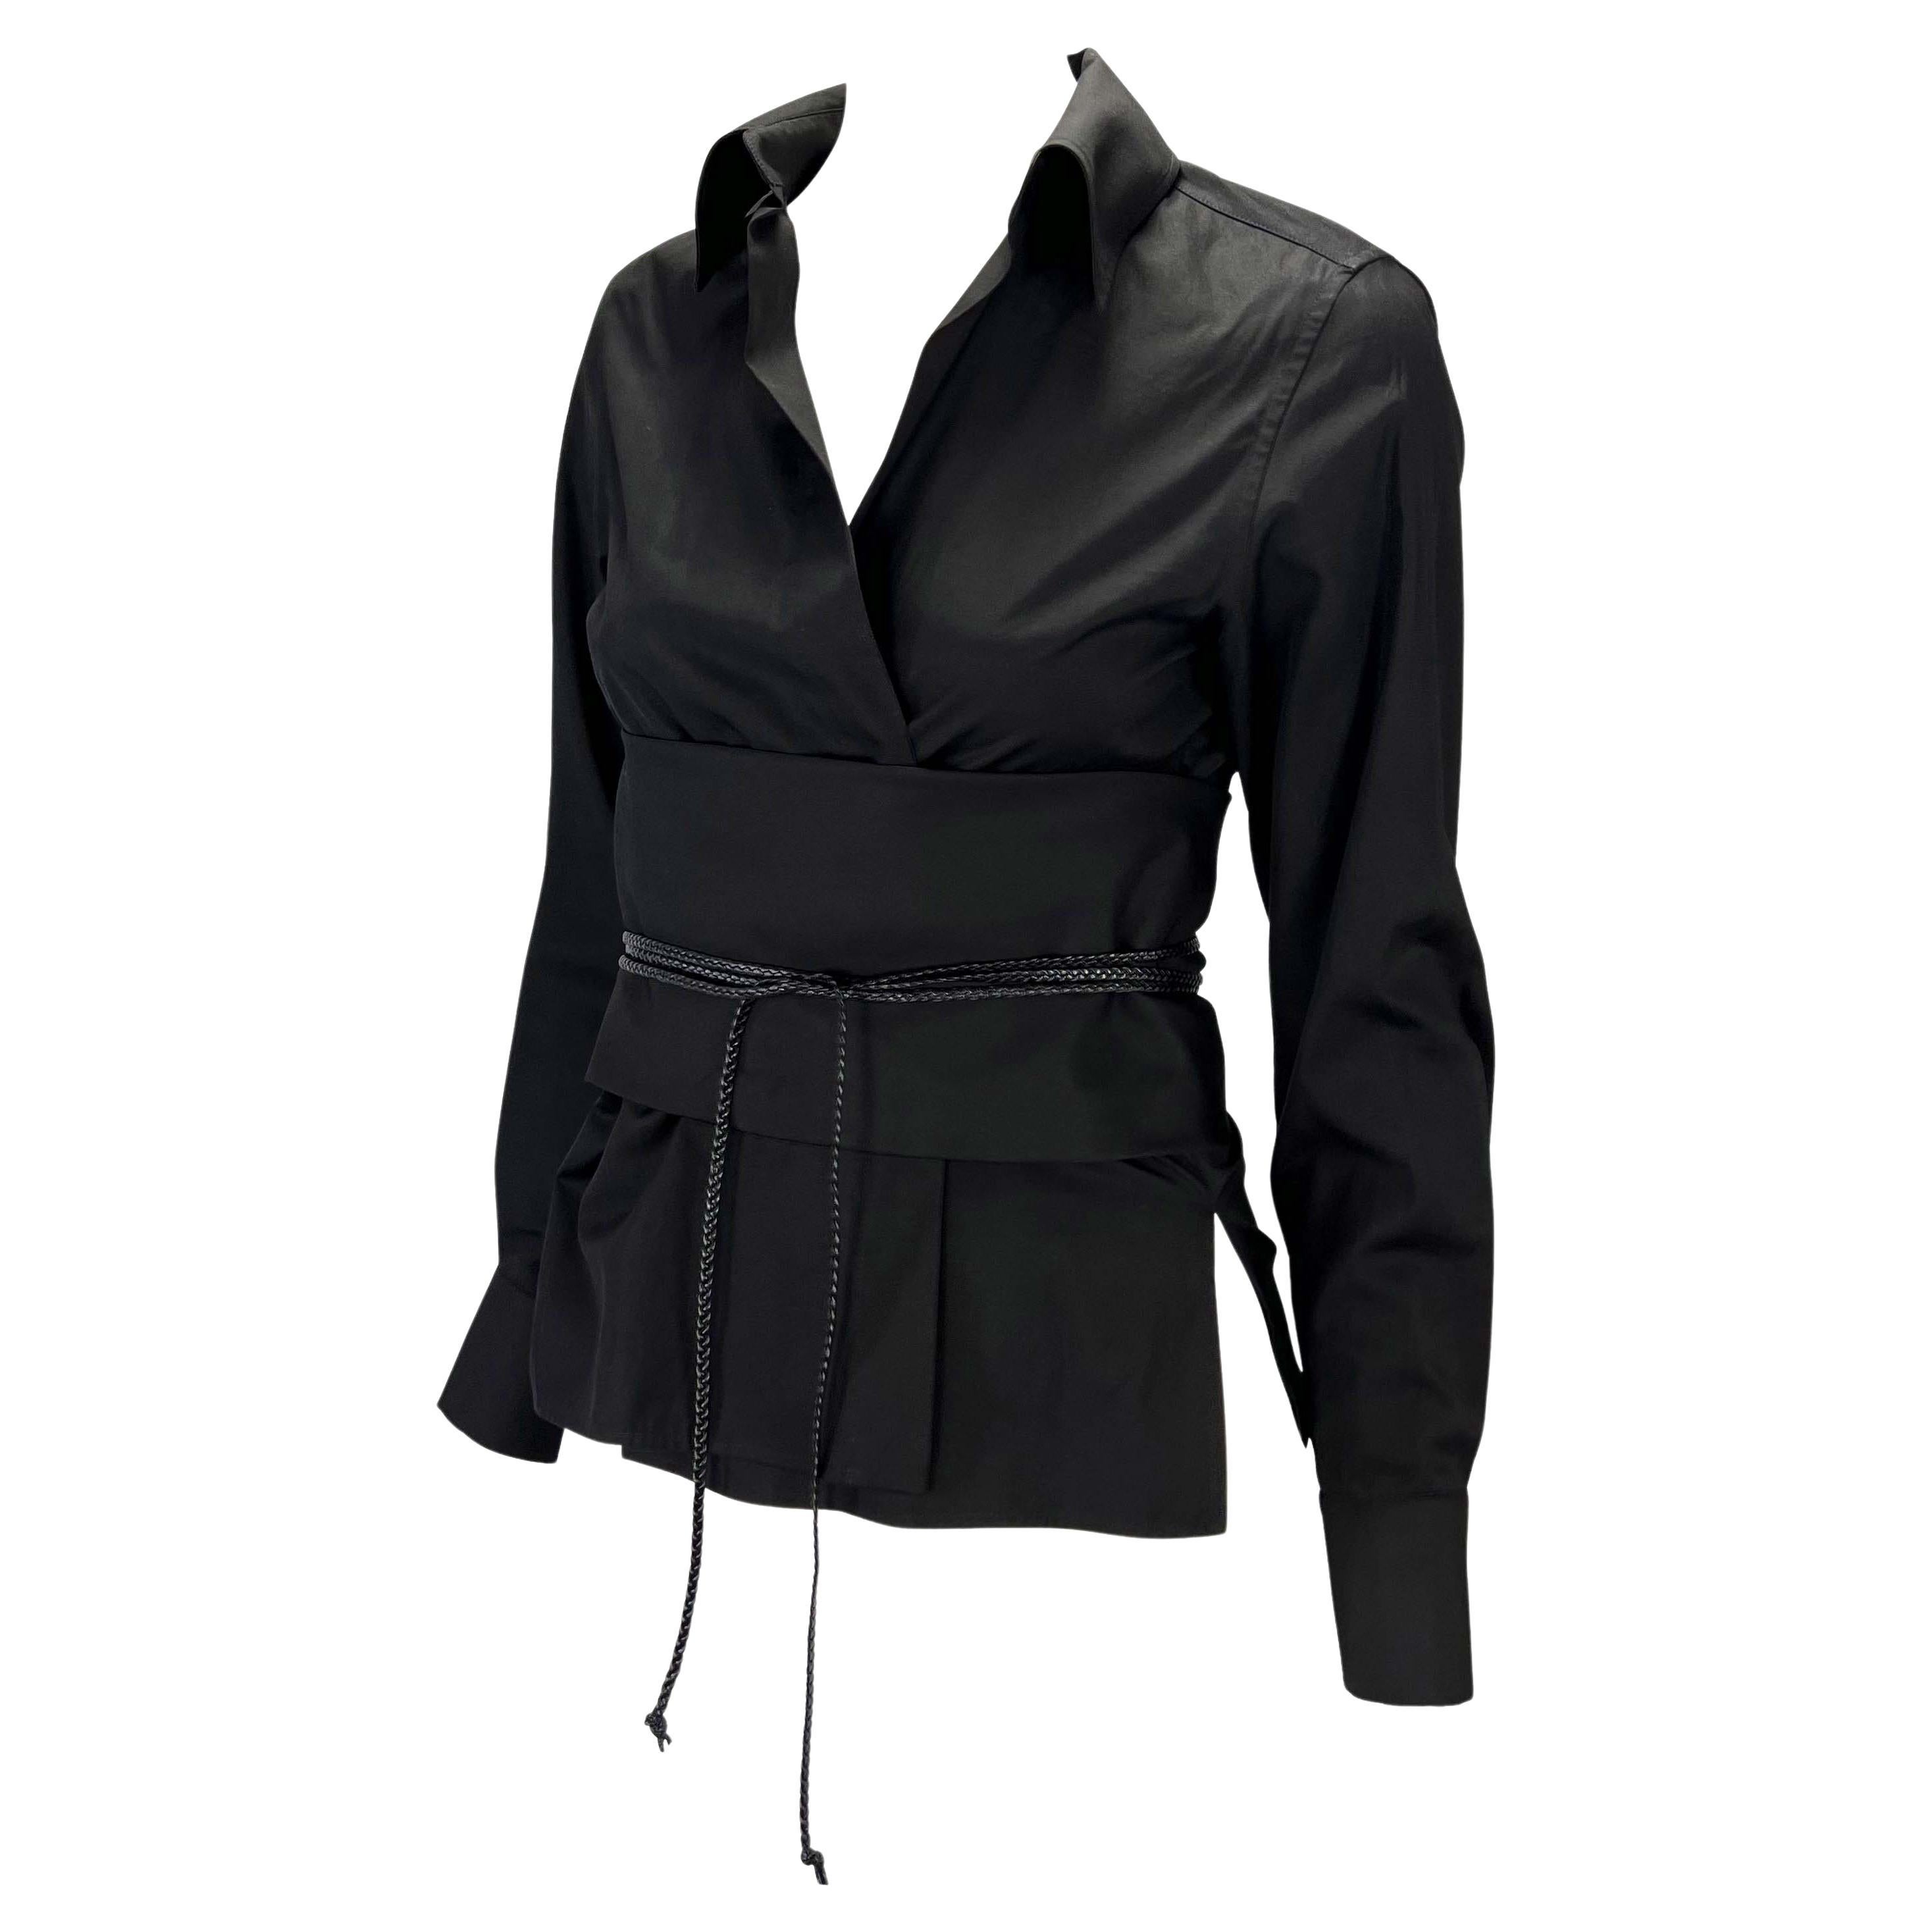 F/W 2002 Gucci by Tom Ford Black Obi Leather Belted Plunge Cotton Blouse  In Excellent Condition For Sale In West Hollywood, CA